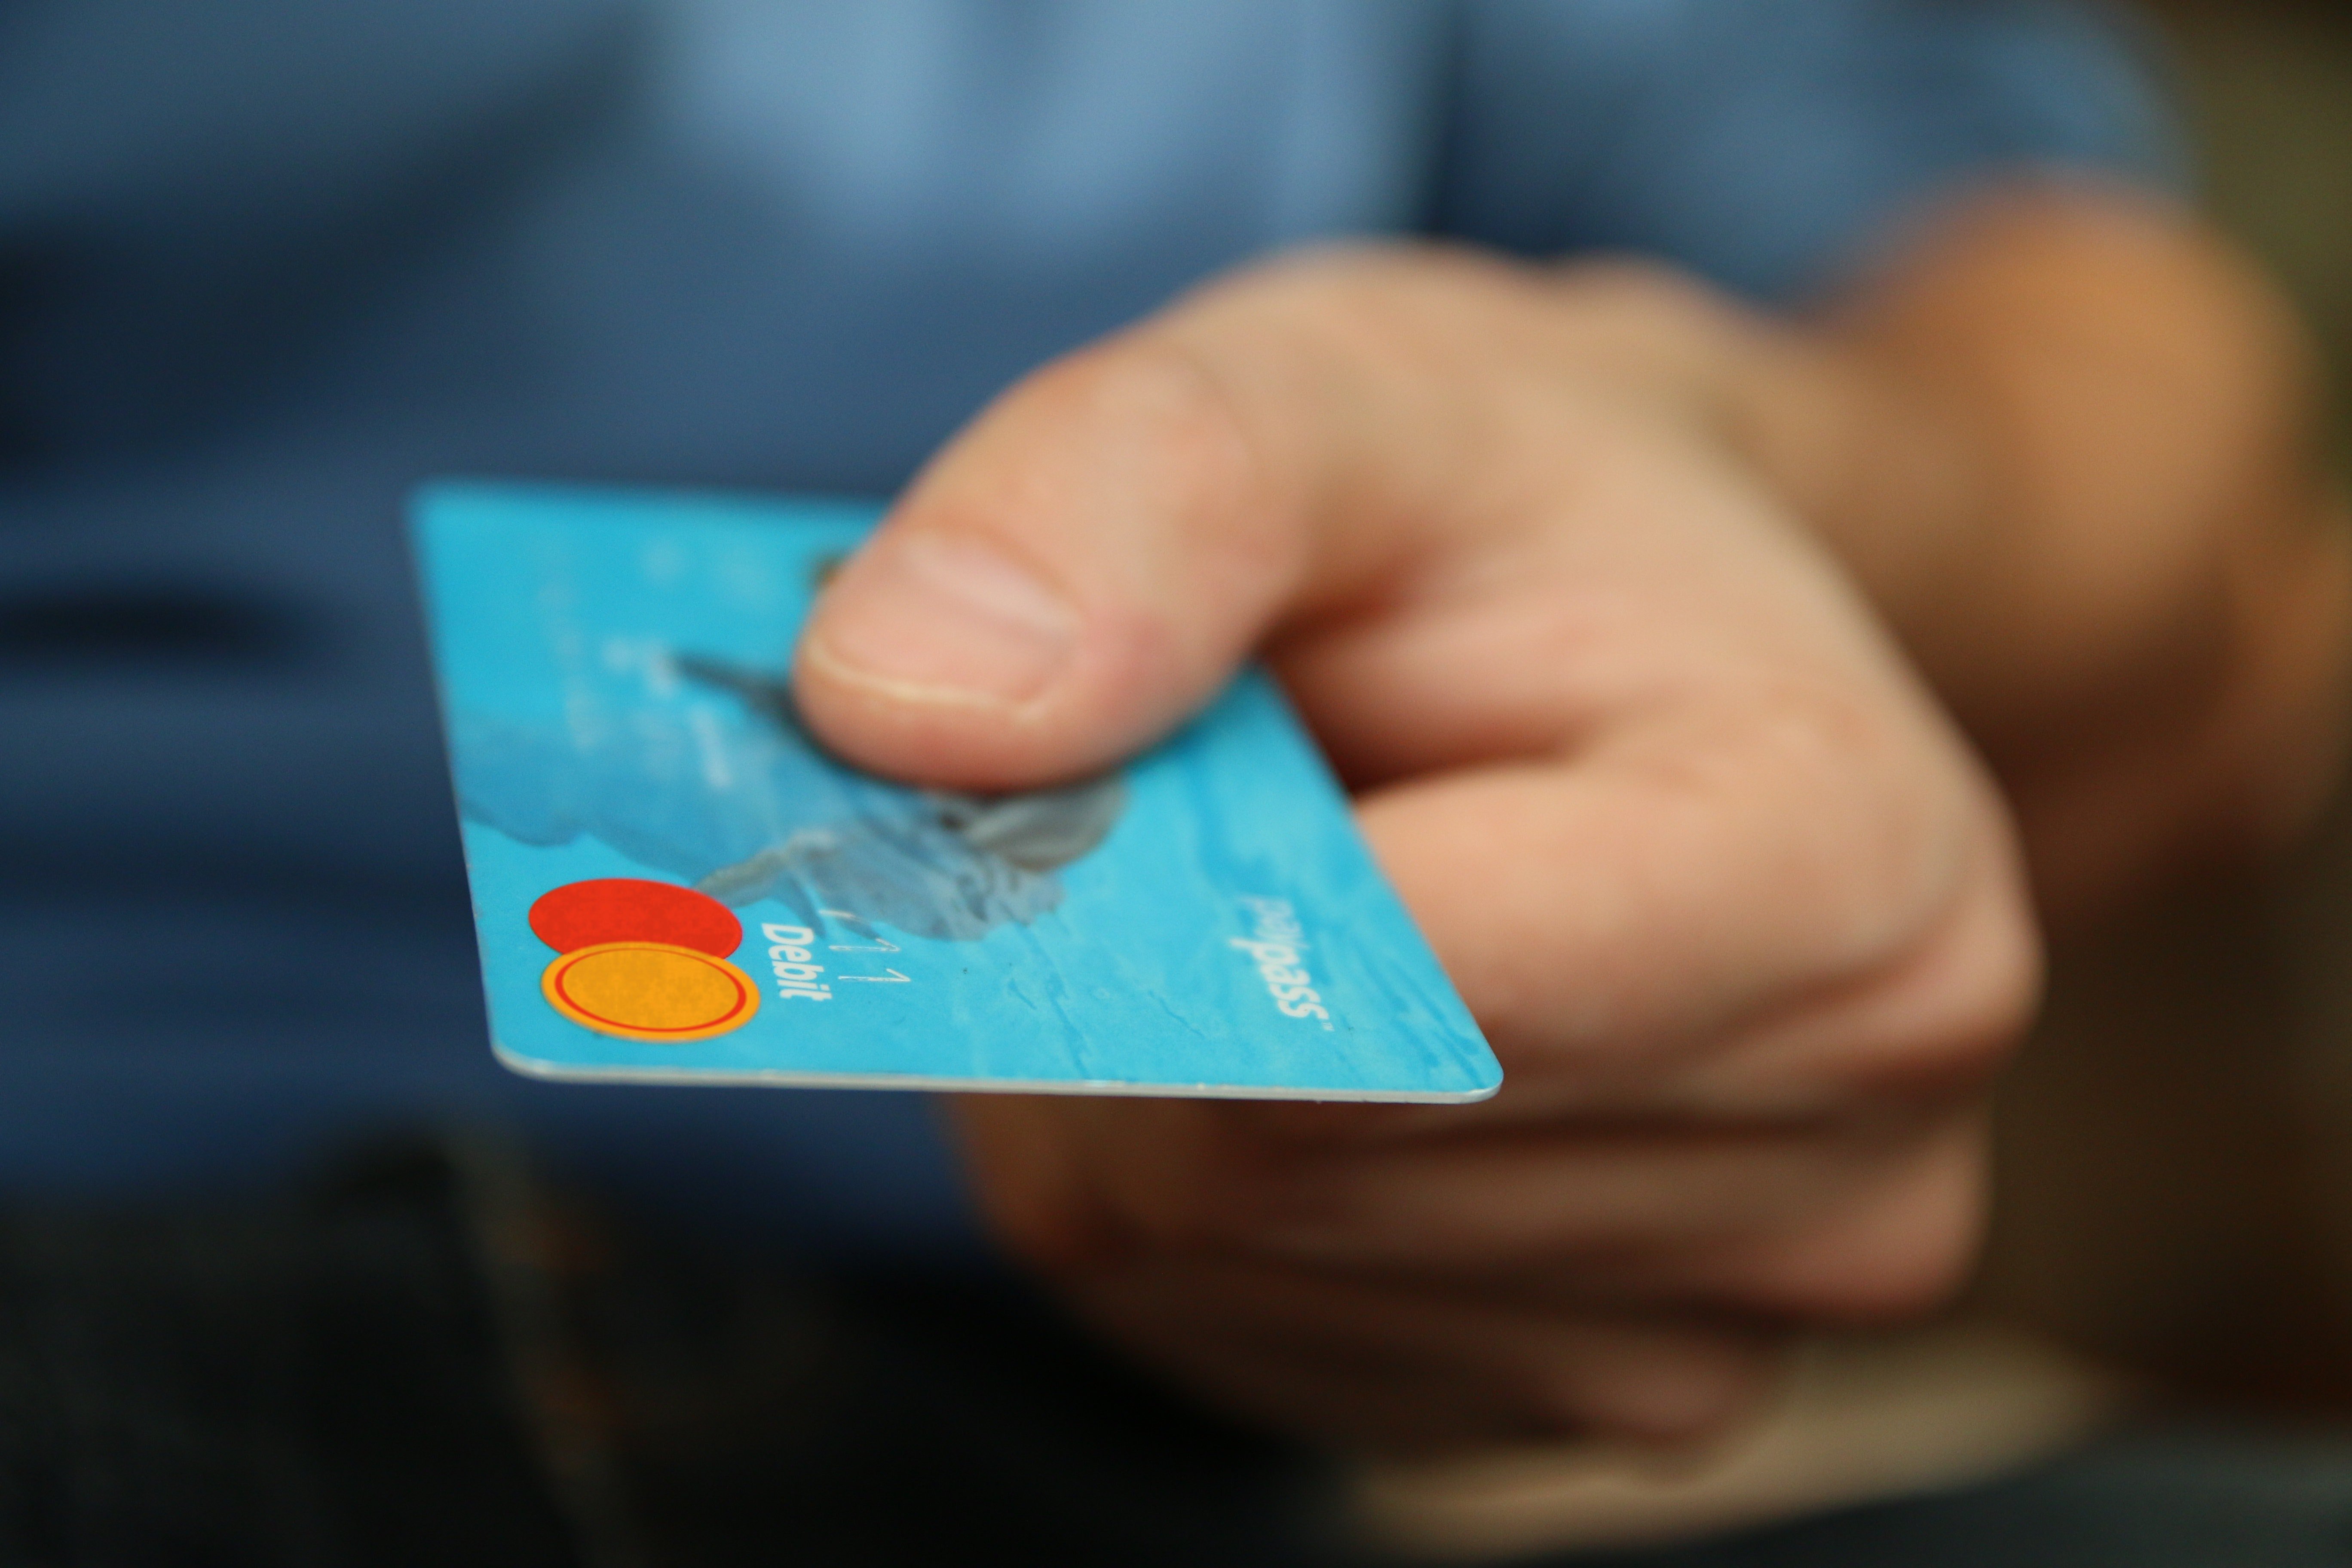 A photo of a credit card | Source: Pexels